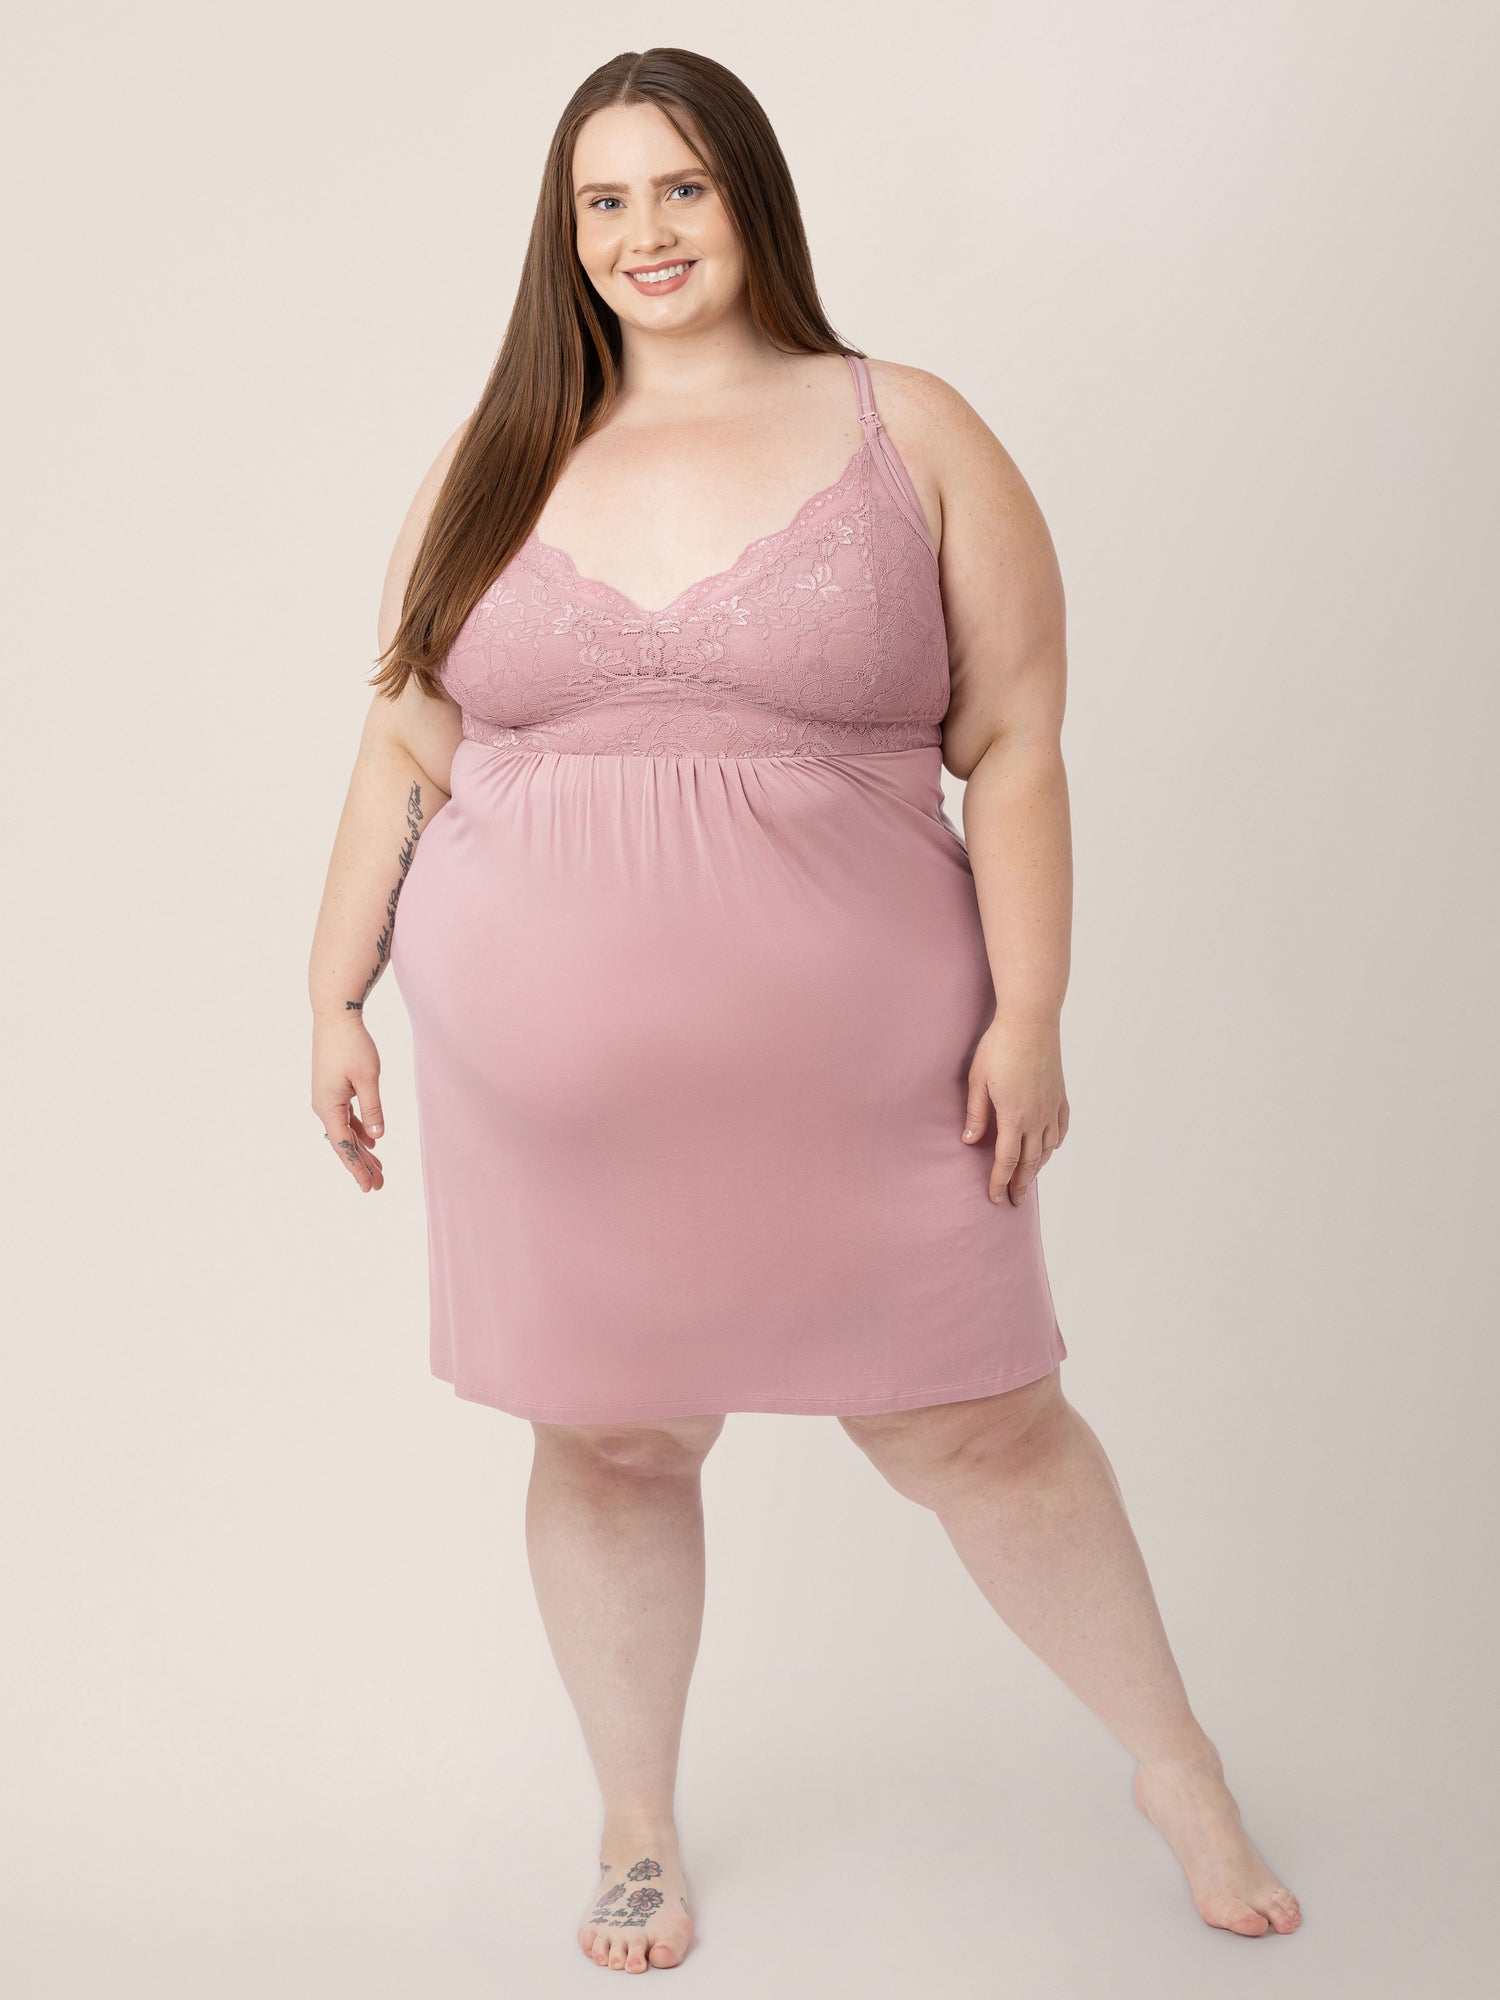 Model standing with her weight more on one leg than the other with her hands at her side while wearing the Lucille Maternity & Nursing Nightgown in Vintage Pink. 